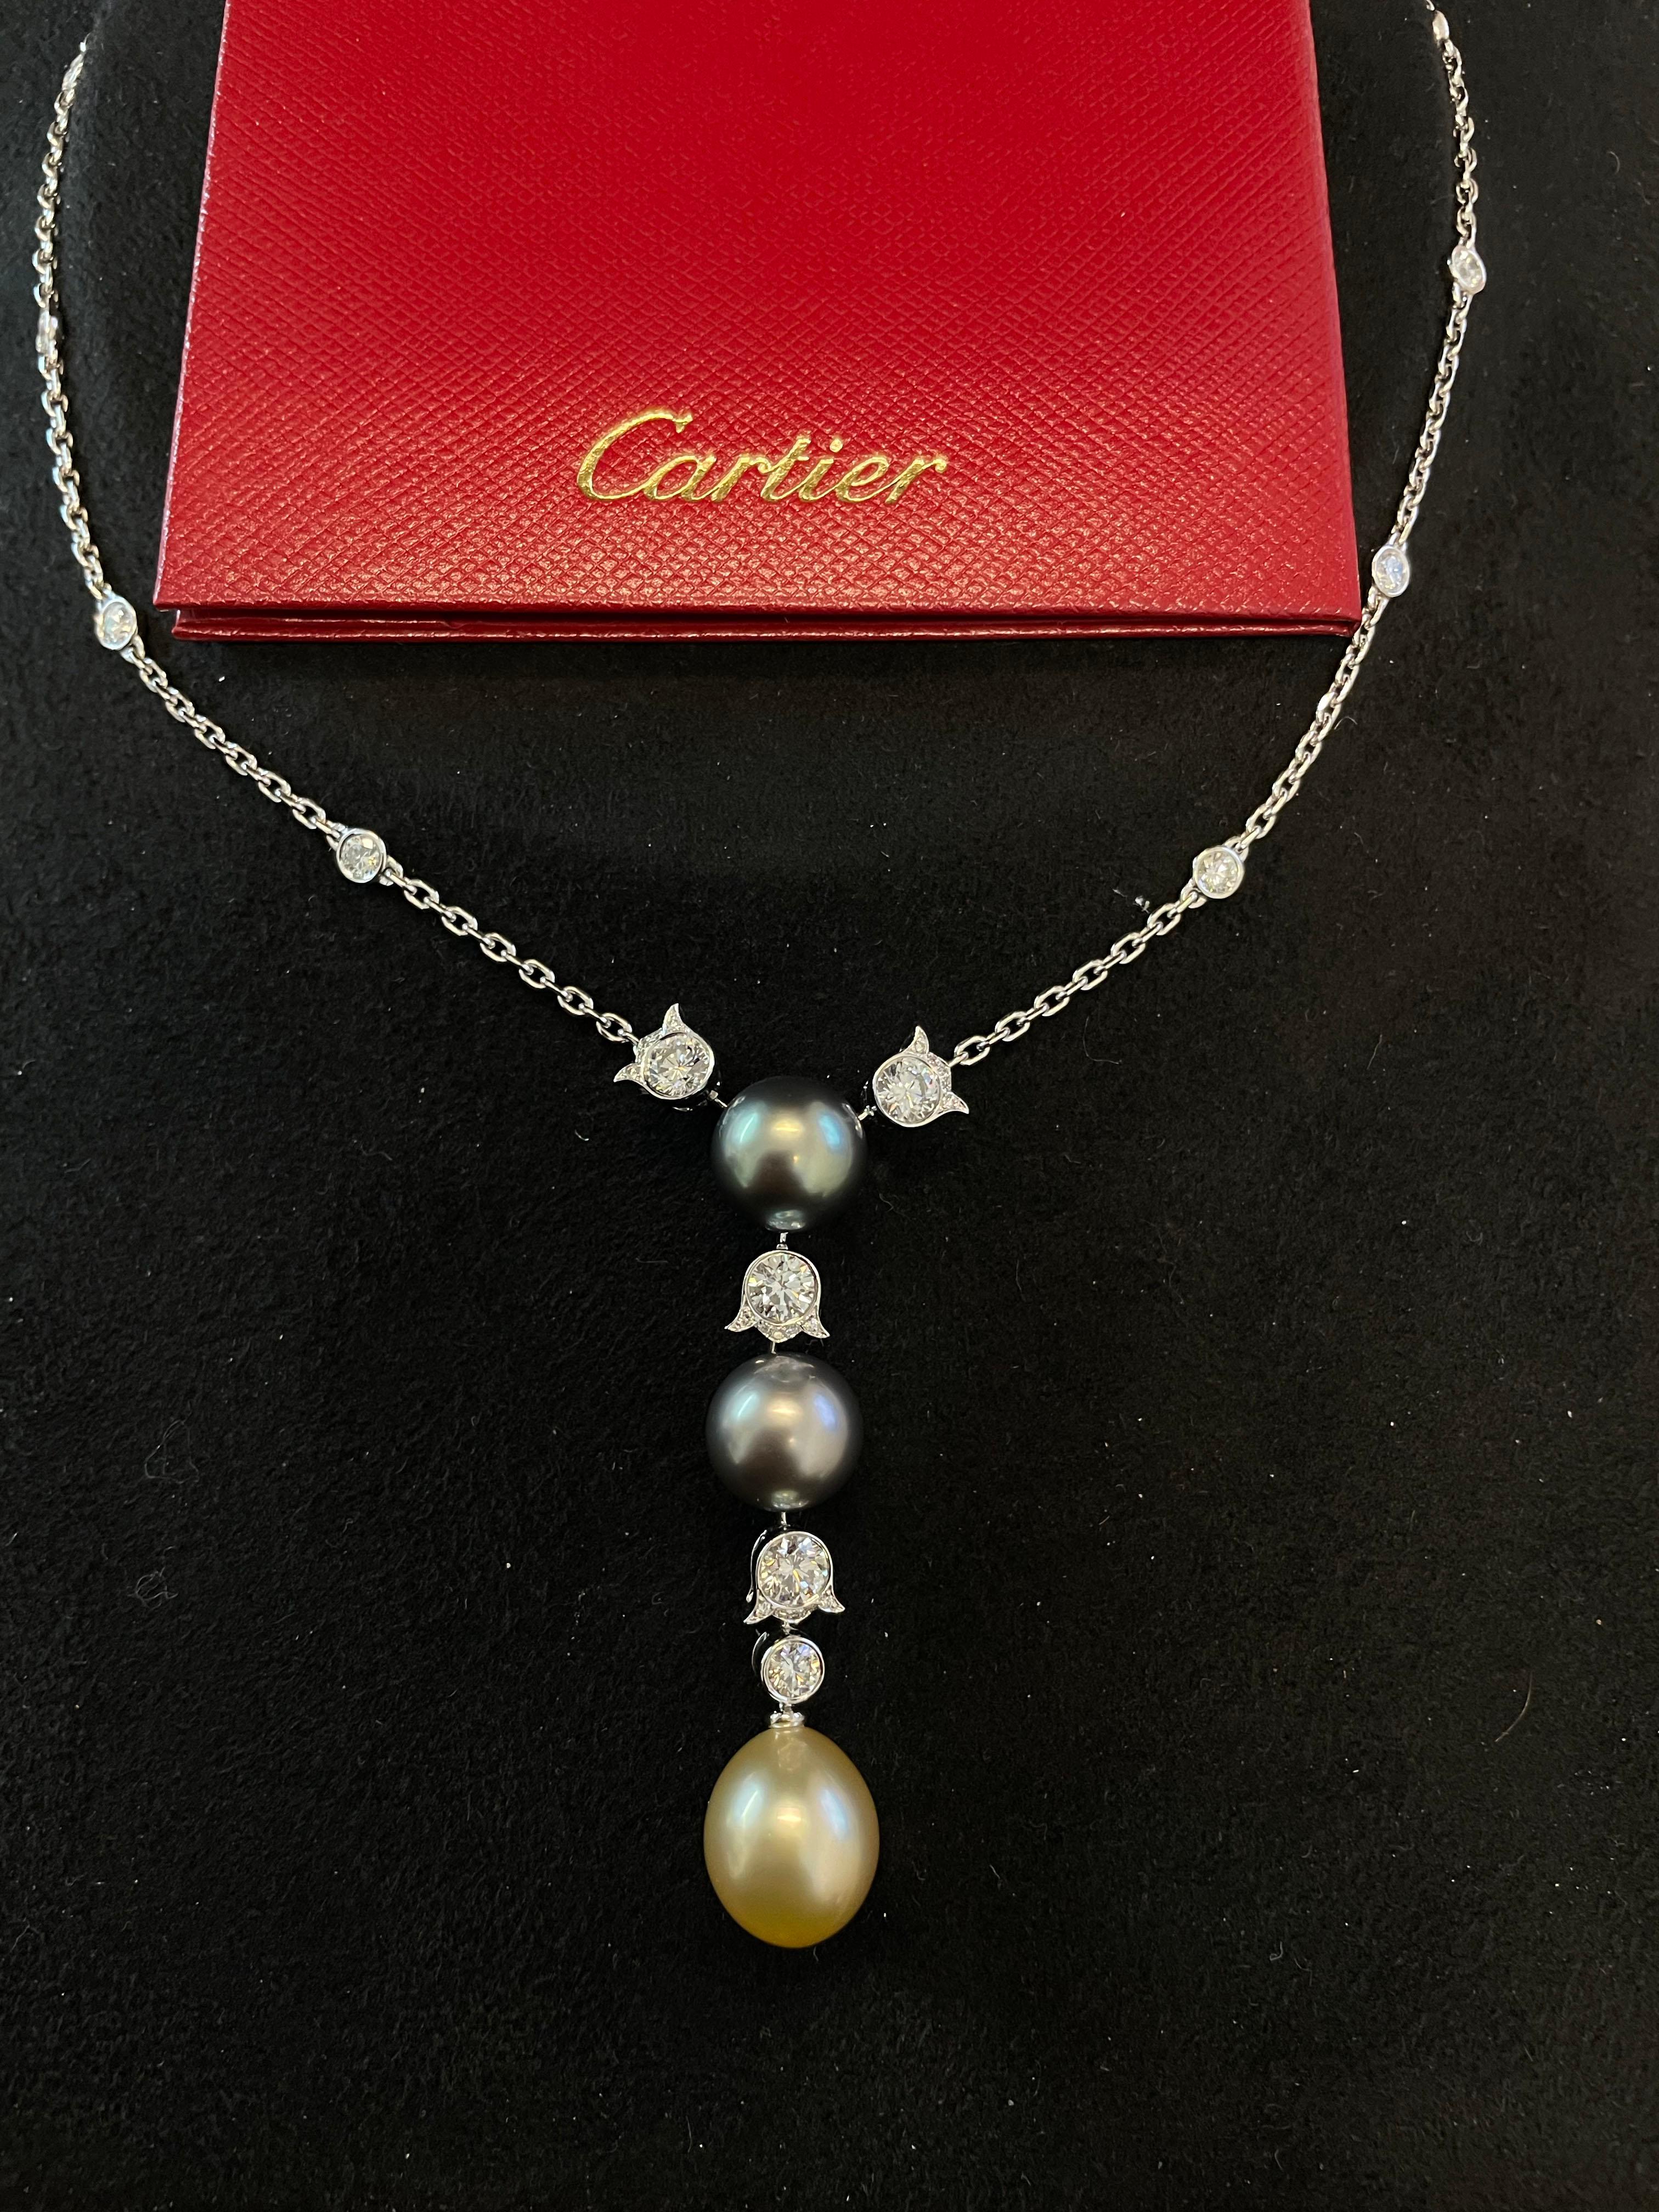 Item Details: This stunning Cartier necklace has three pearls and diamonds in a station design. This necklace contains its original box and certificate.

Circa: 1990s
Metal Type: 18 karat white gold
Weight: 16.4g
Length: approximately 17